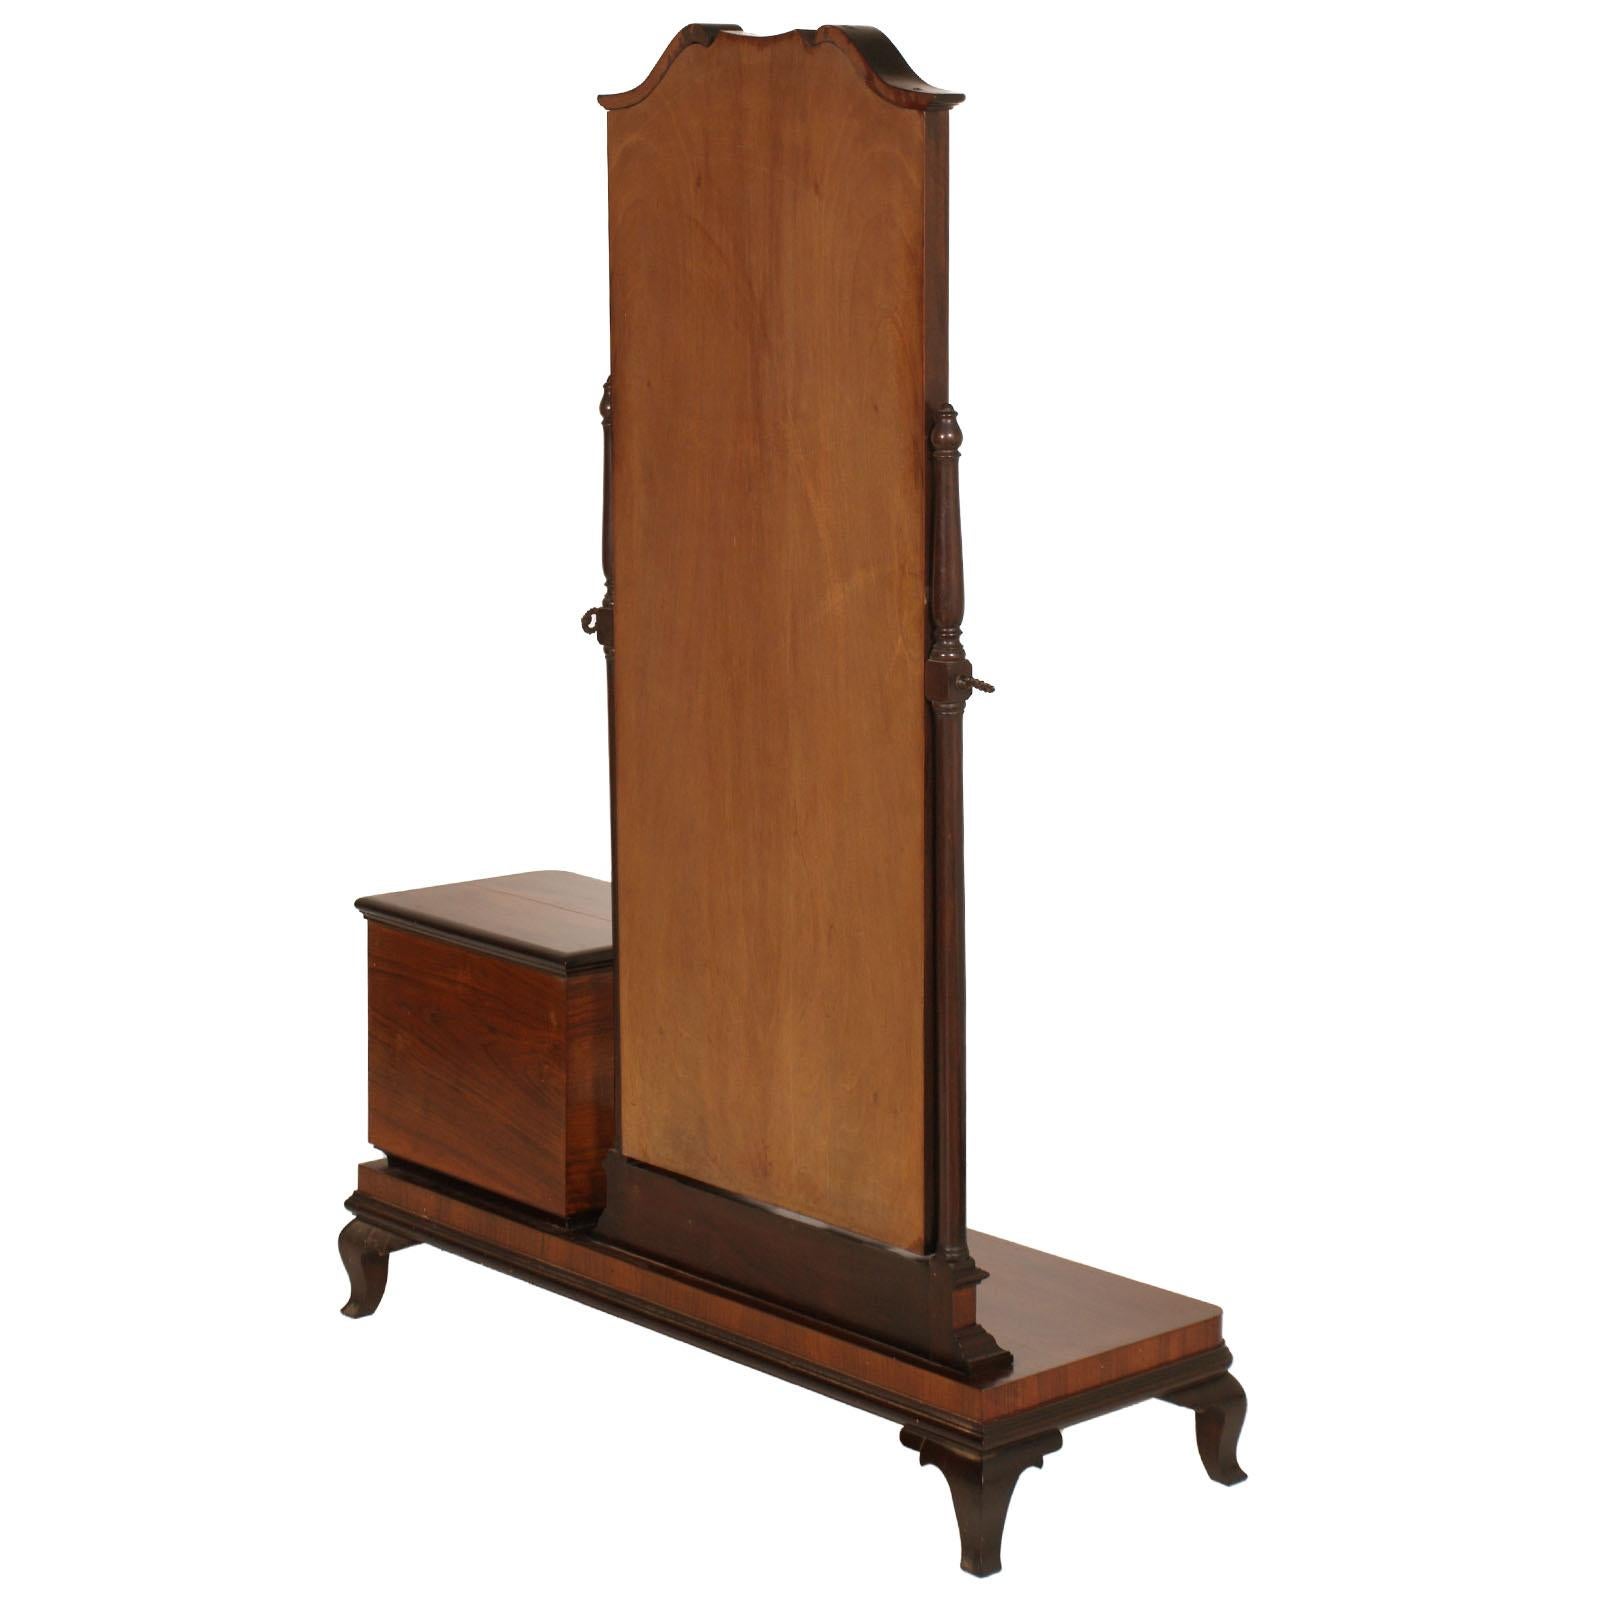 Early 20th Century 1900s Vanity Console Art Nouveau with Original Beveled Mirror in Walnut and Burl For Sale